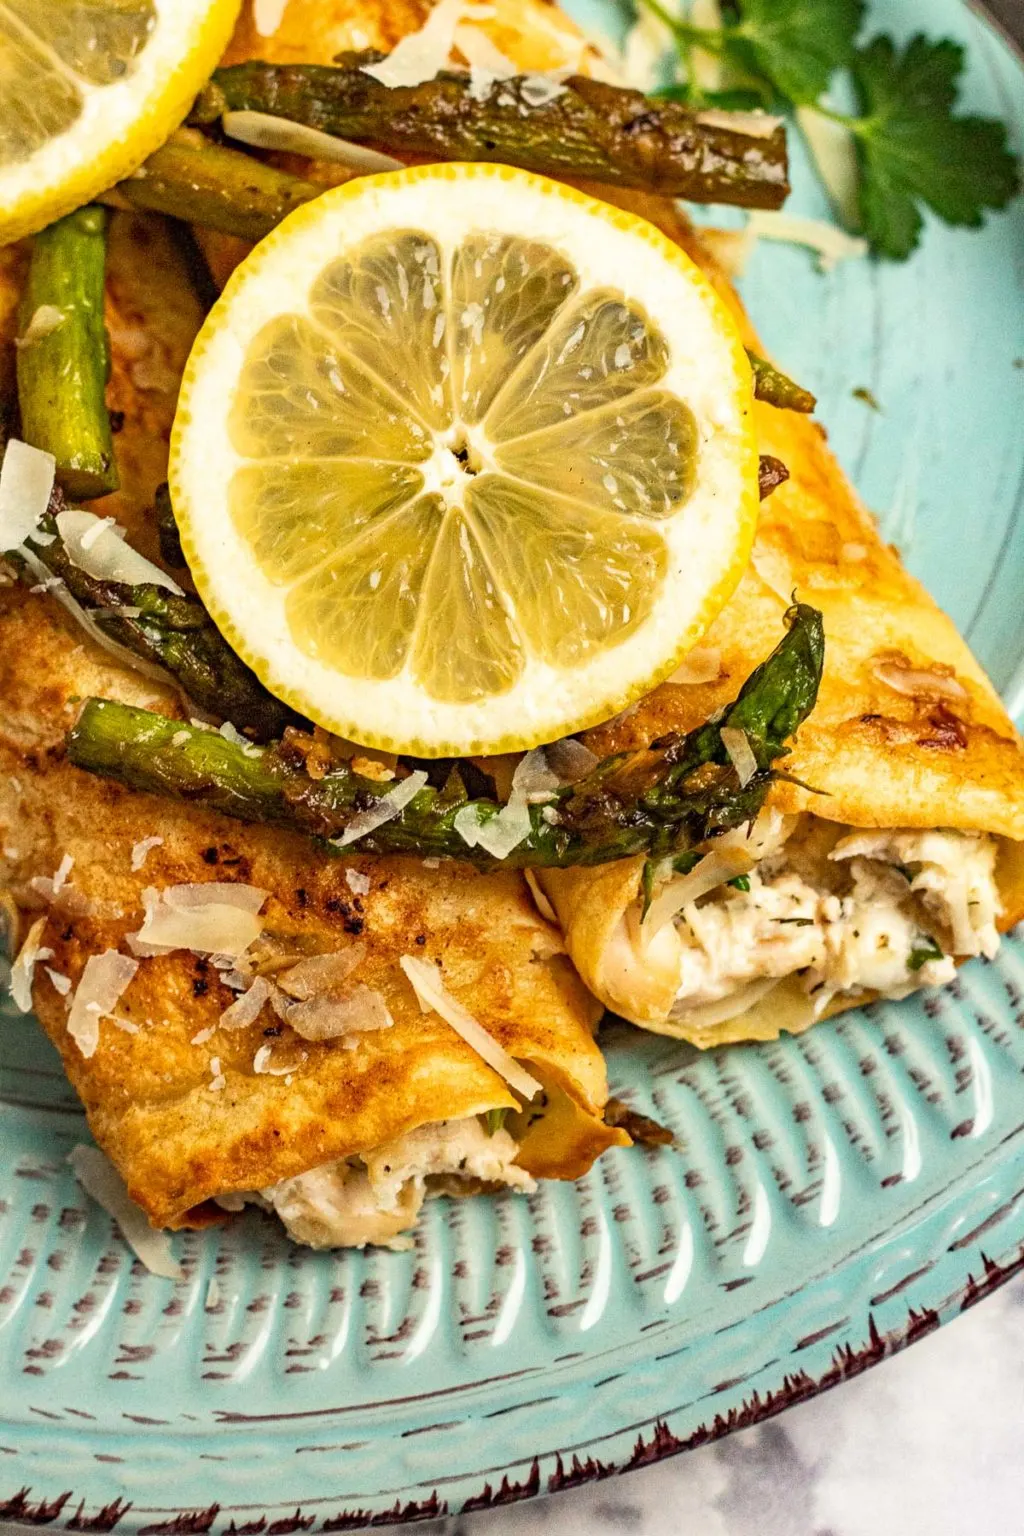 Chicken asparagus crepe with asparagus and lemon on a plate.